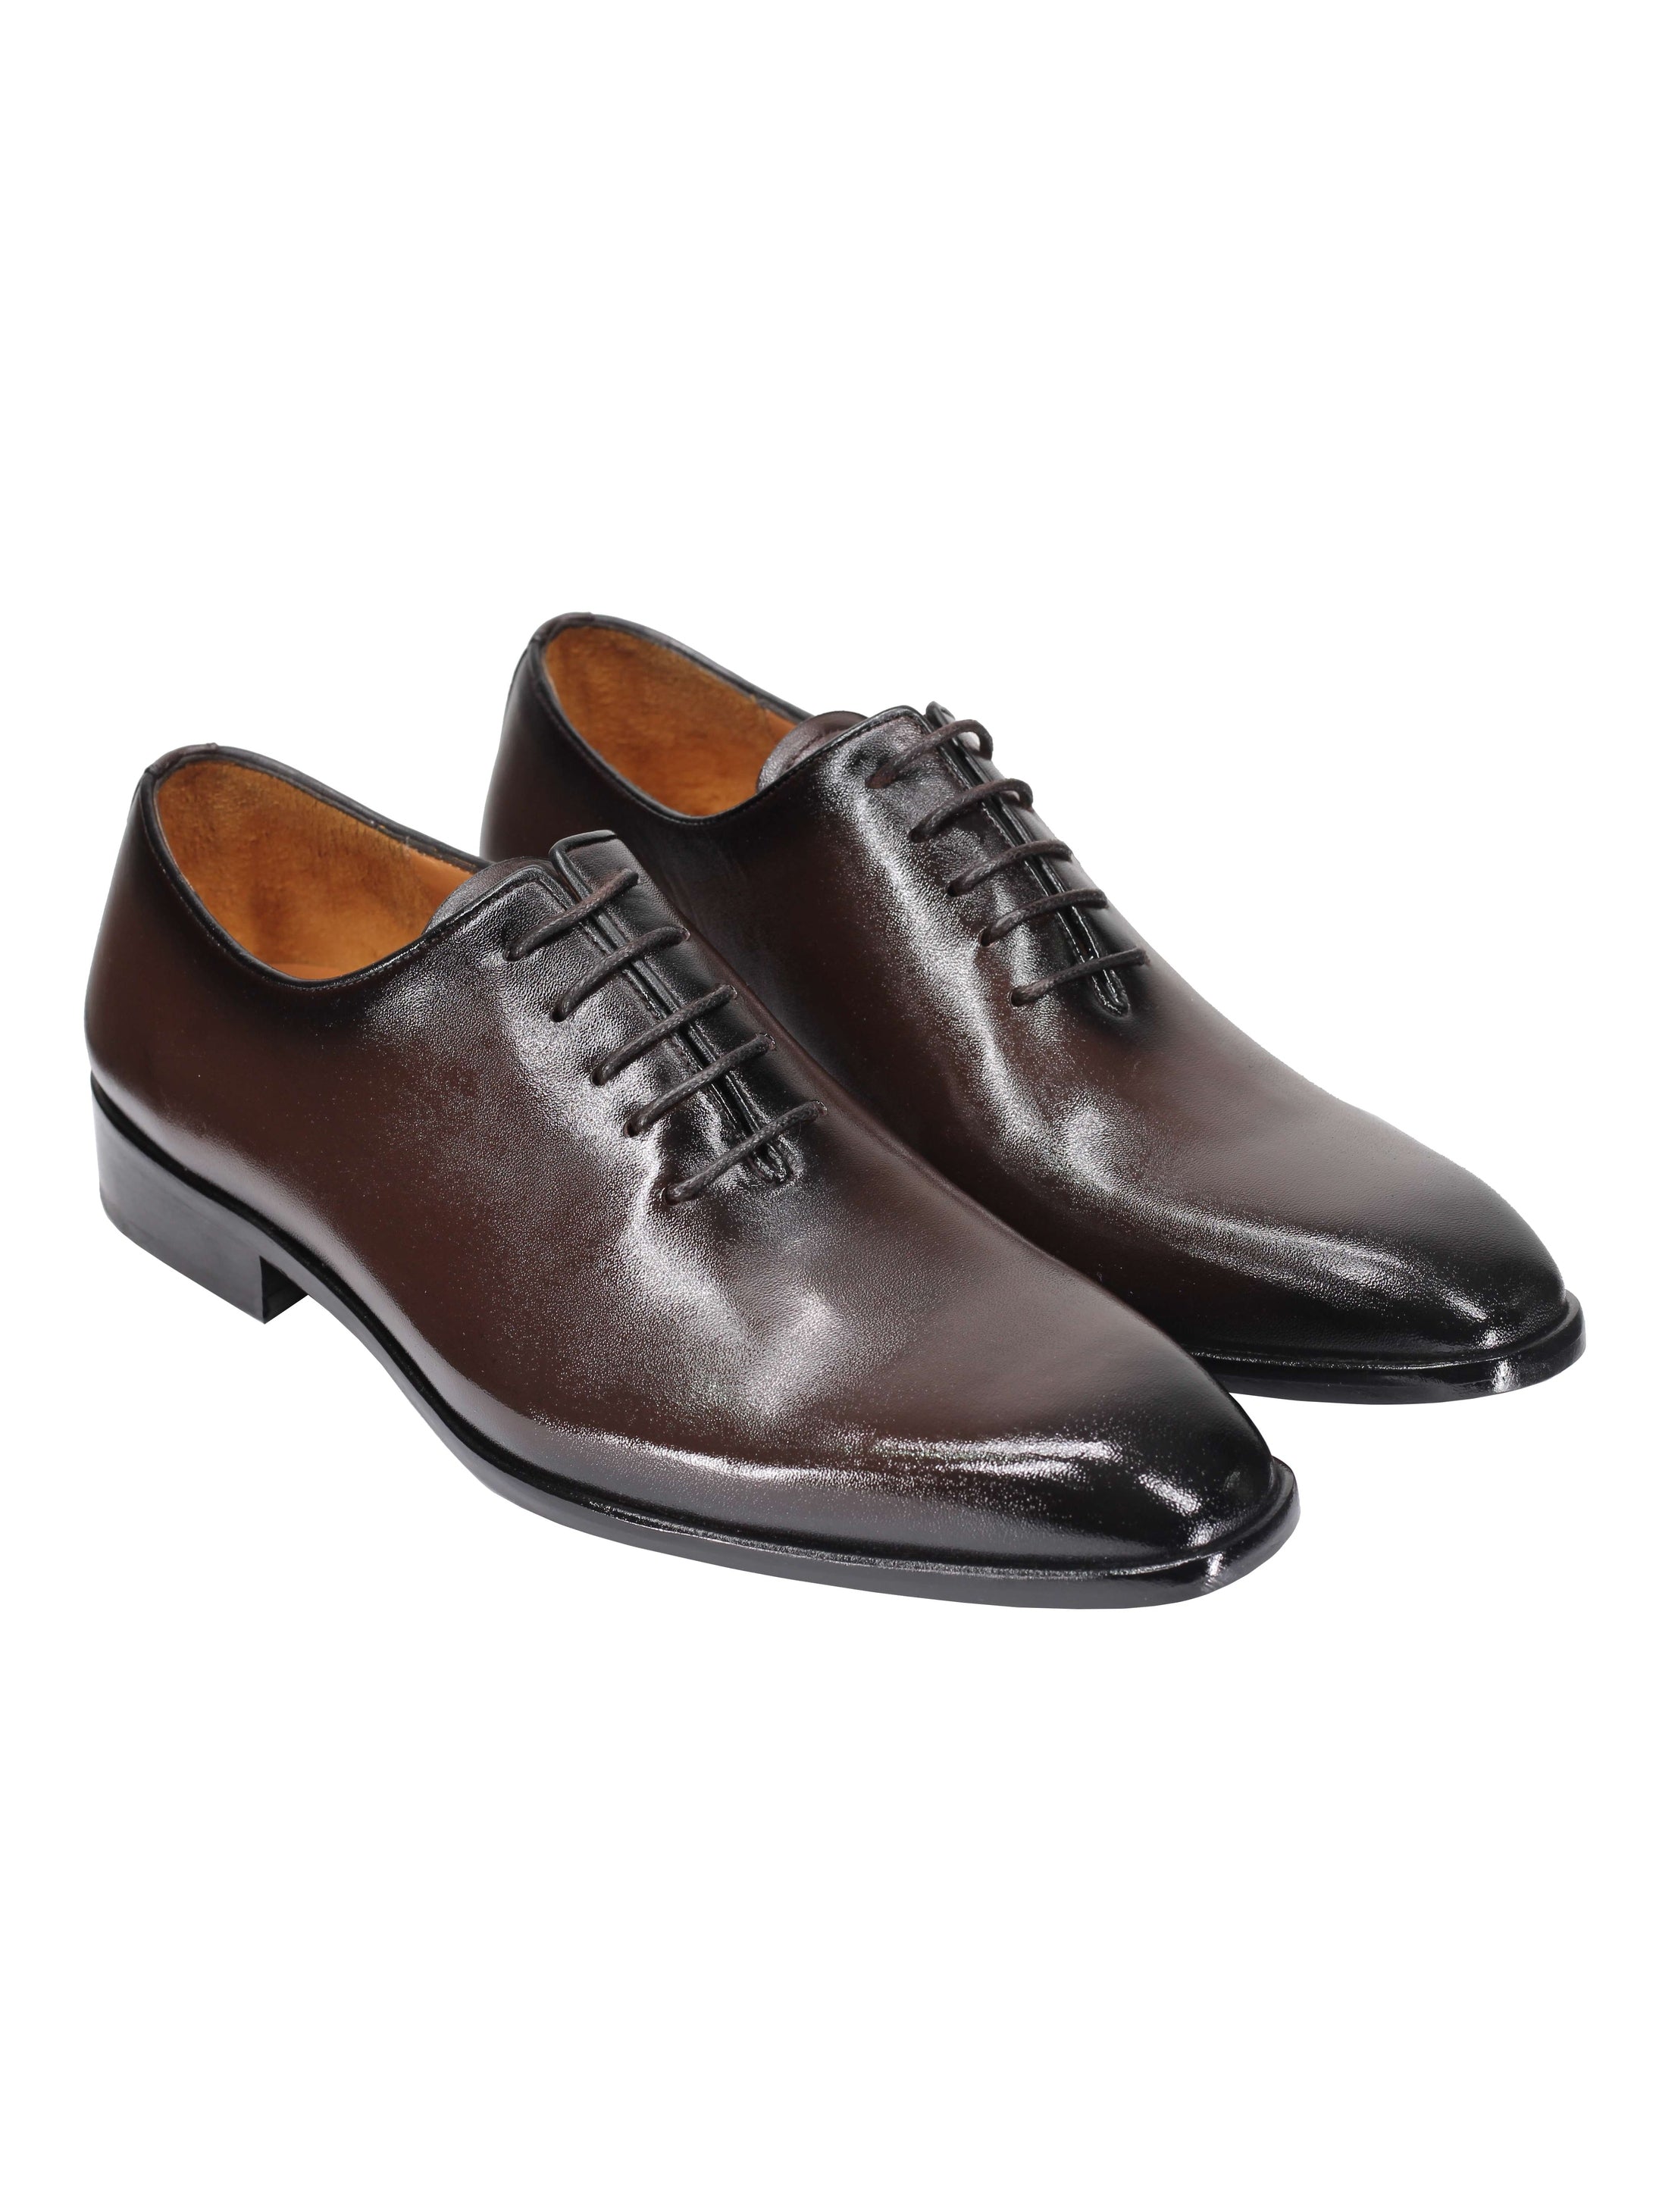 CALF LEATHER WHOLECUT OXFORD LACE UP SHOES IN BROWN – XPOSED